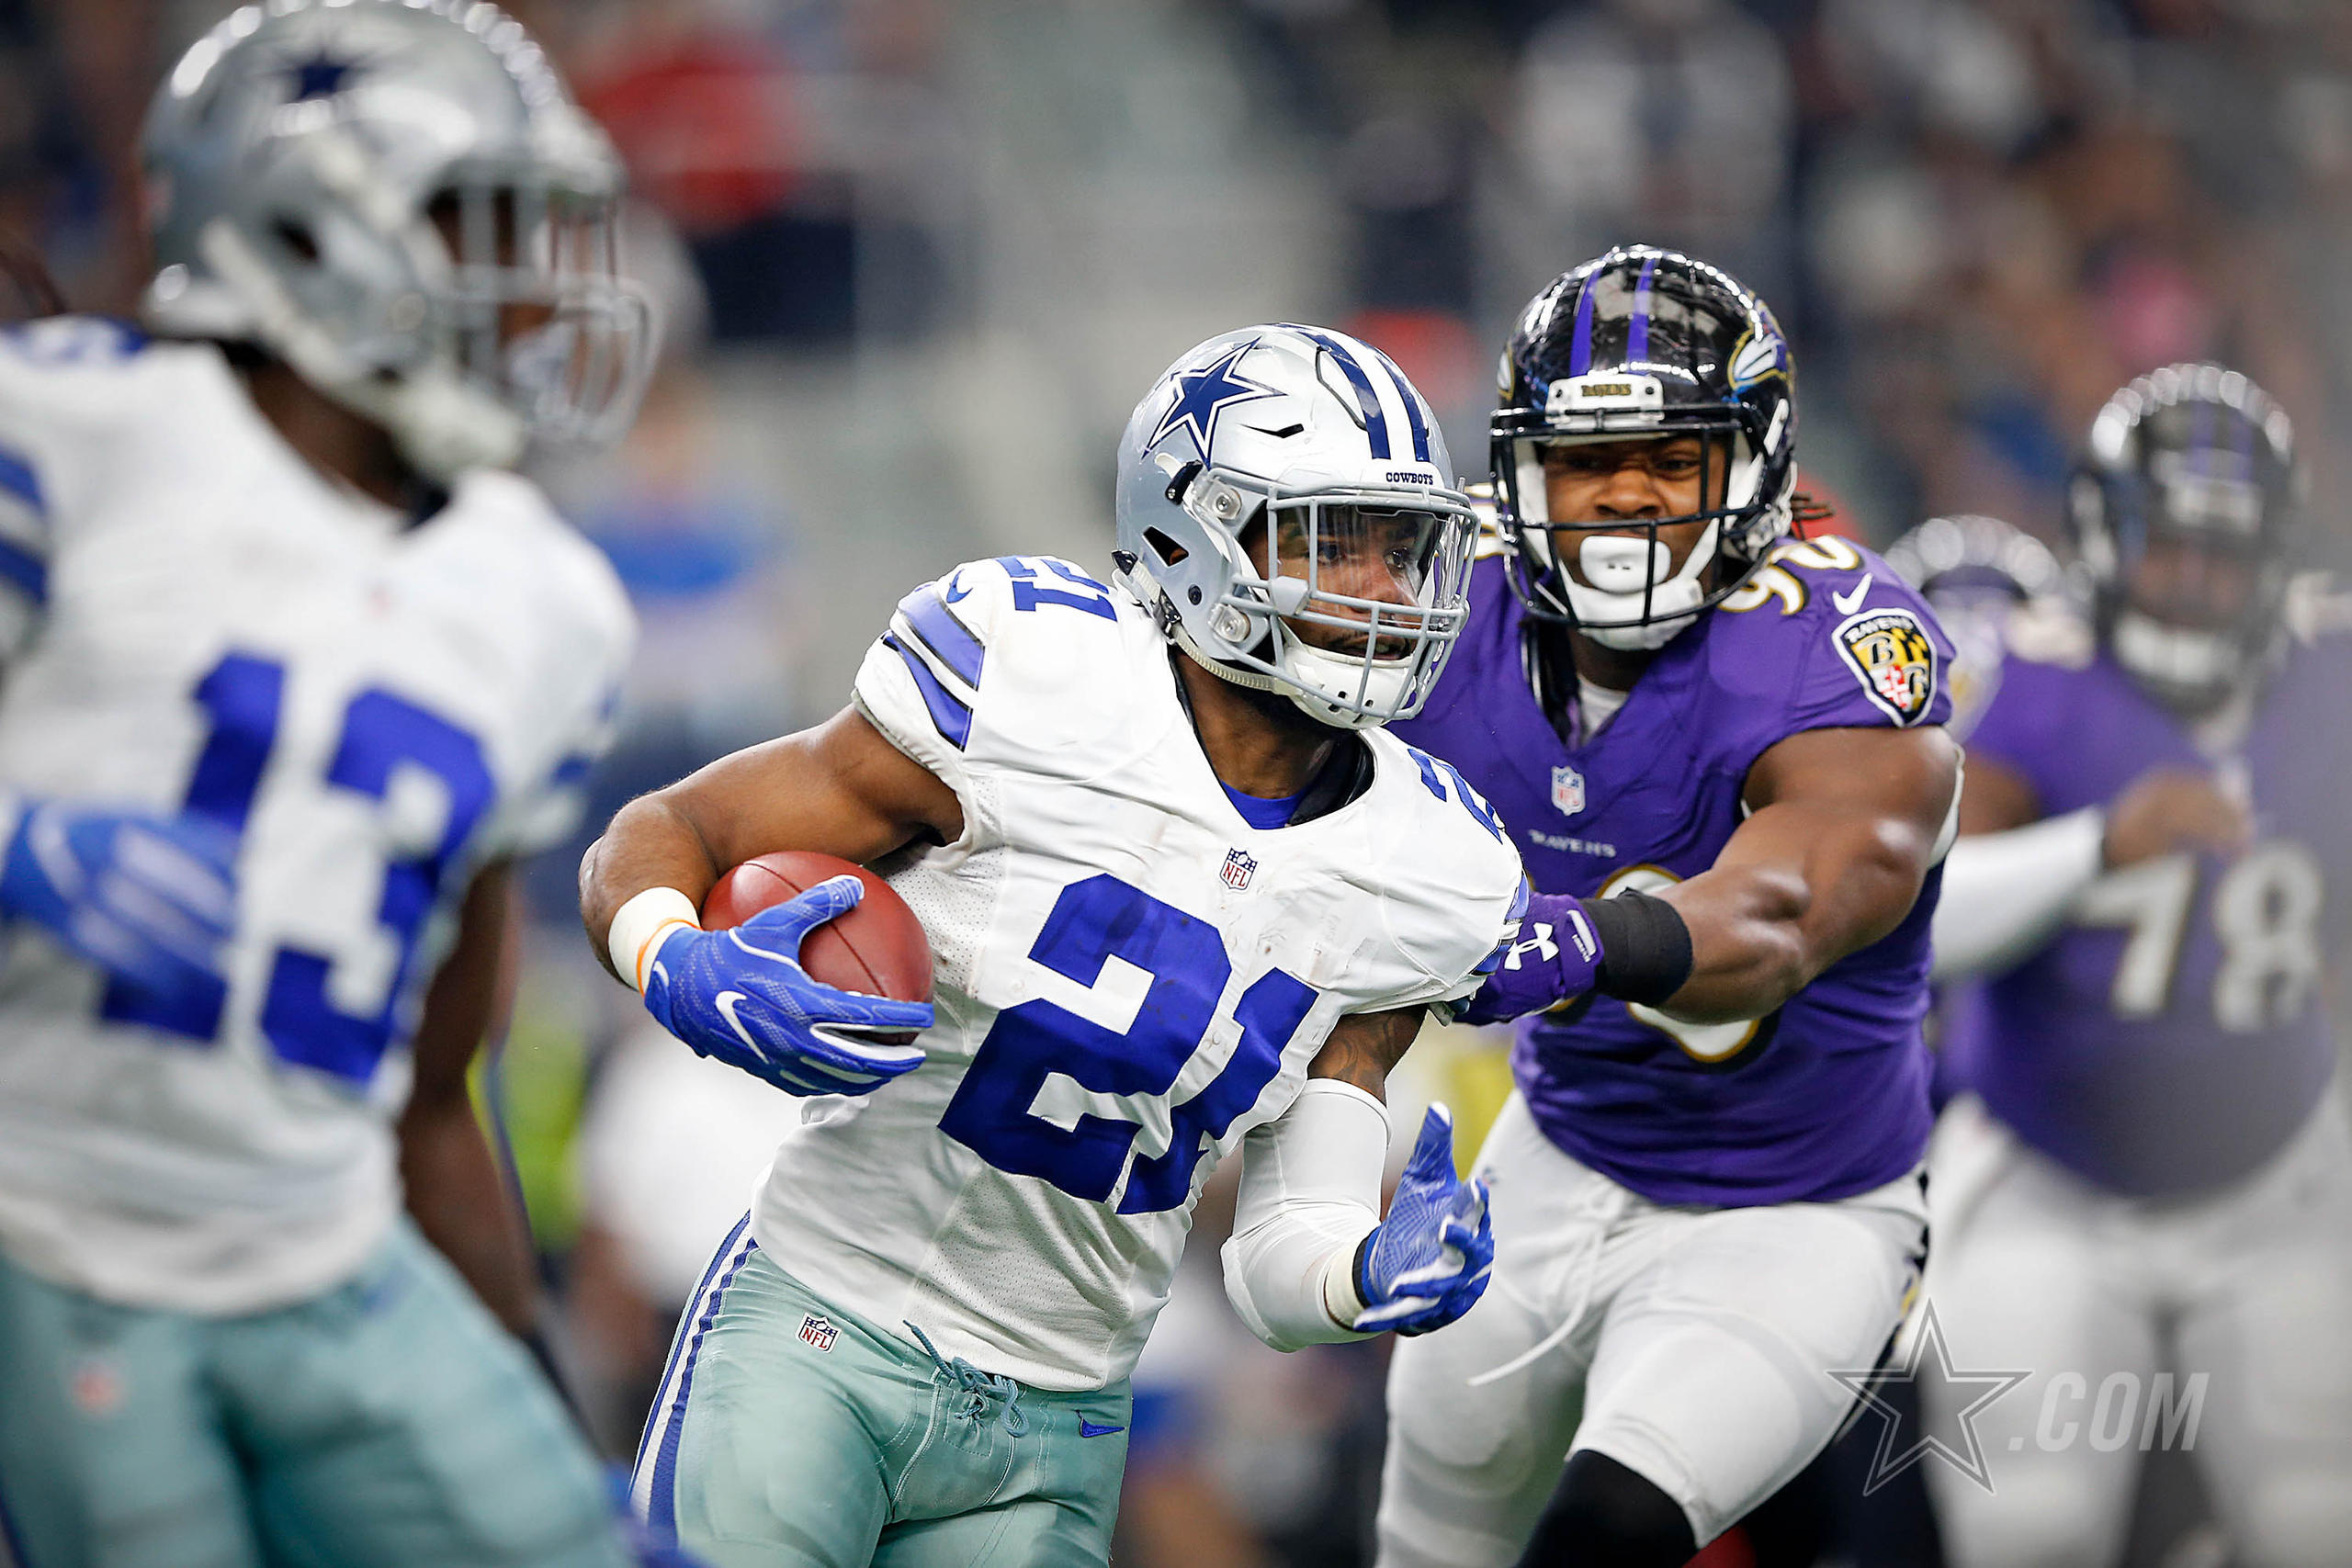 20 November 2016: Views of the Dallas Cowboys in the first half of their game against the Baltimore Ravens in the 2016 NFL week 11 regular season football game at AT&T Stadium in Arlington, Texas. Photo by James D. Smith/Dallas Cowboys